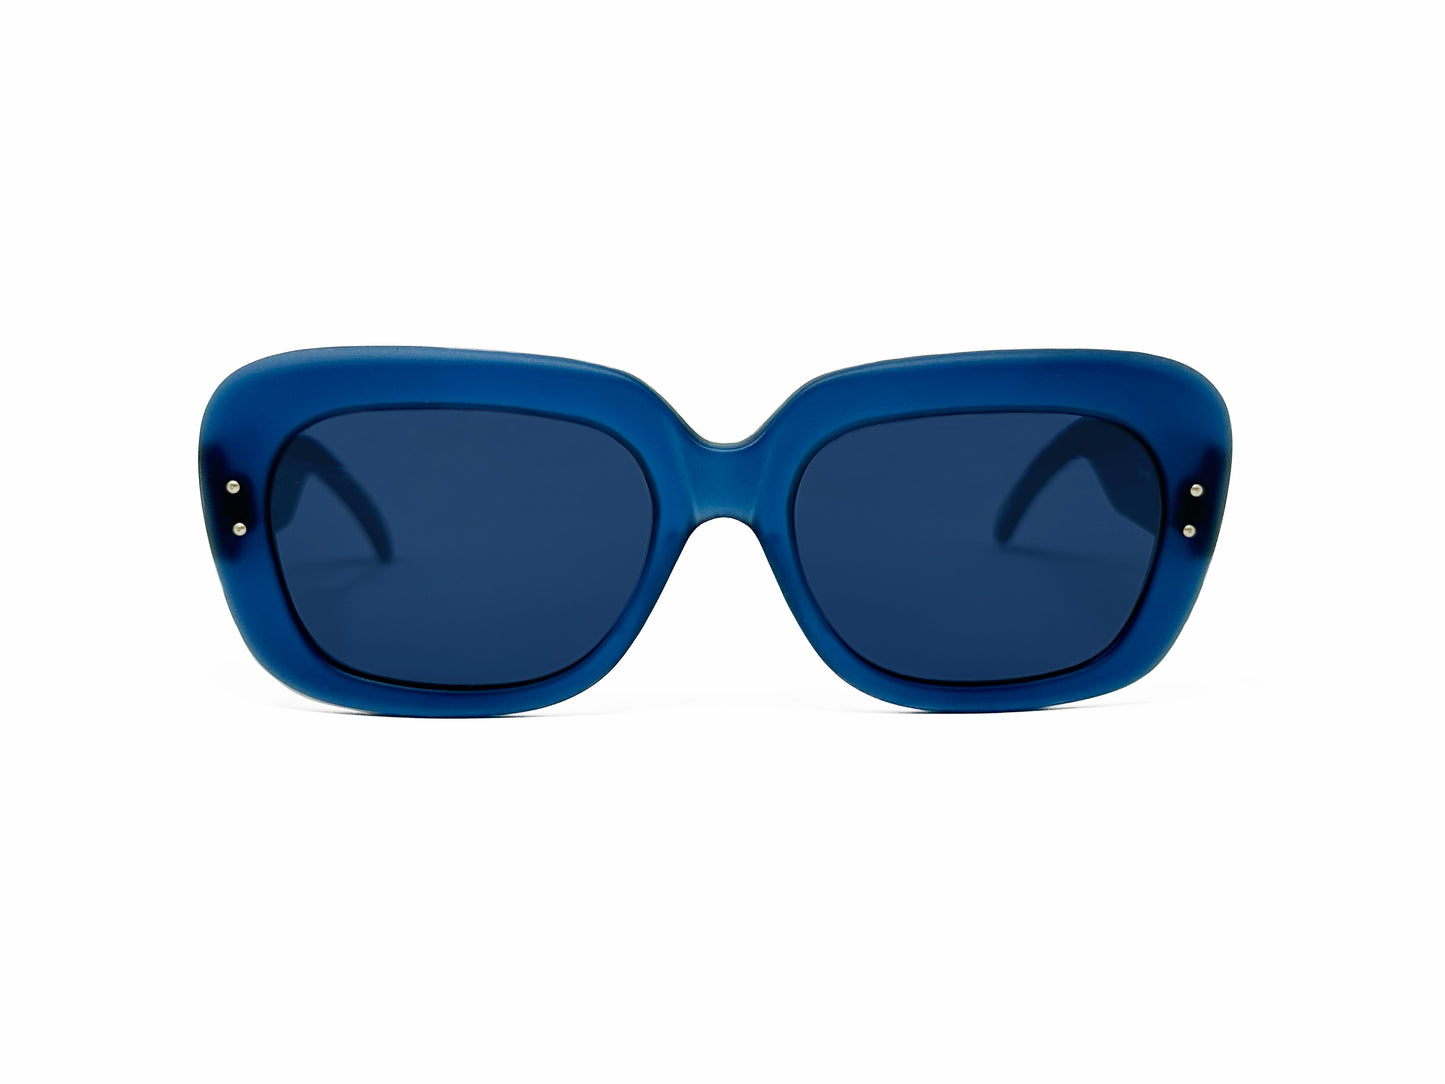 Kador rounded-square, acetate sunglasses. Model: 2. Color: 0016 - Blue with blue lenses. Front view.